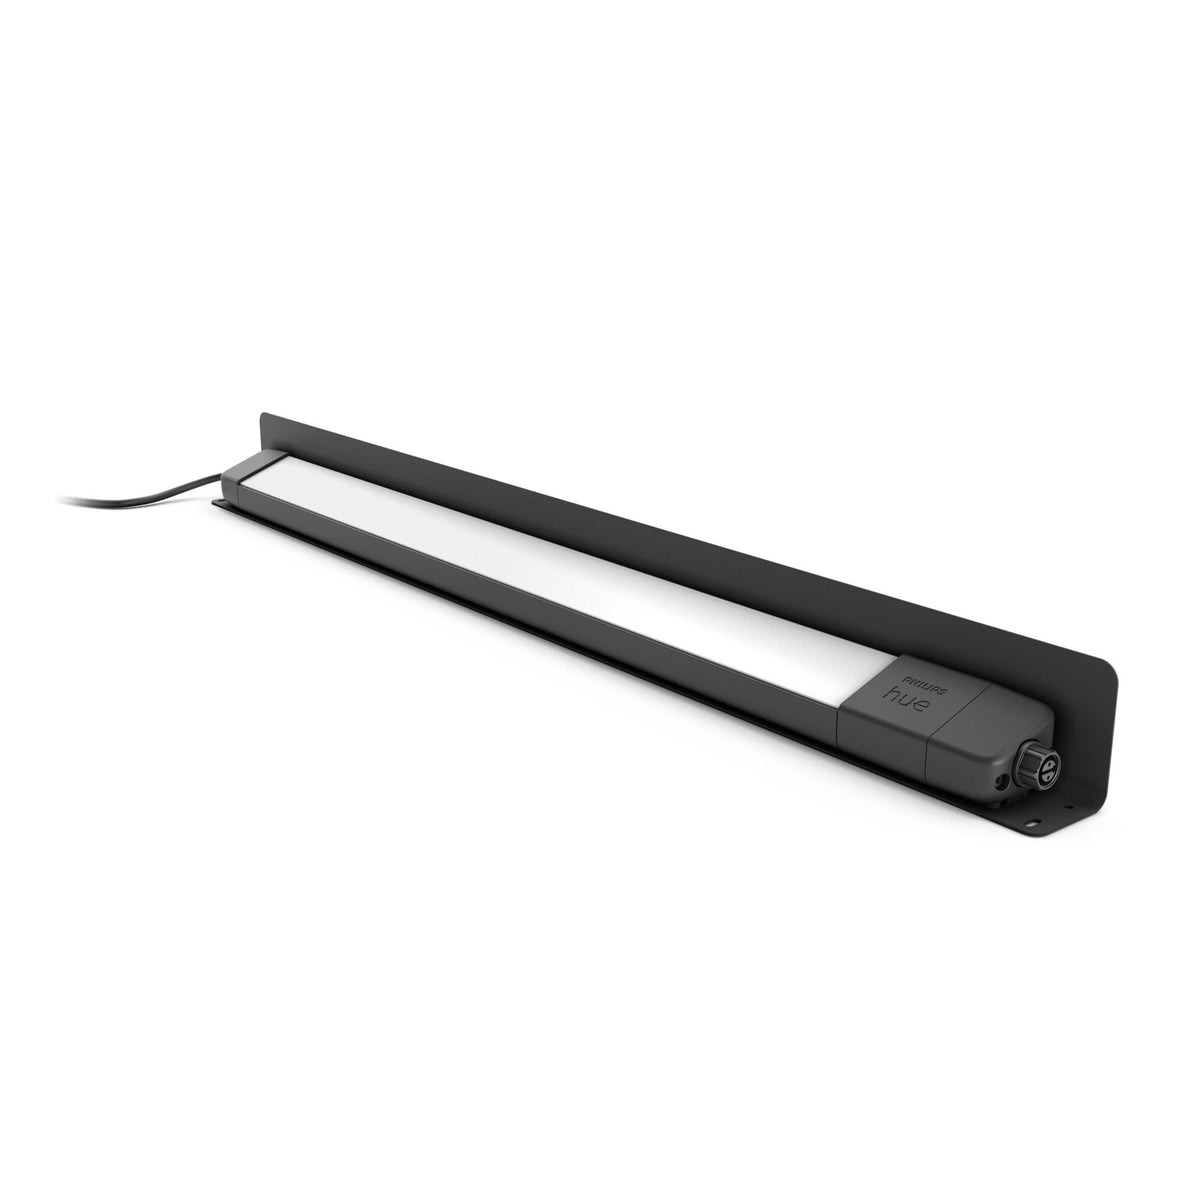 Philips Hue Amarant linear outdoor light in Black - White and colour ambience